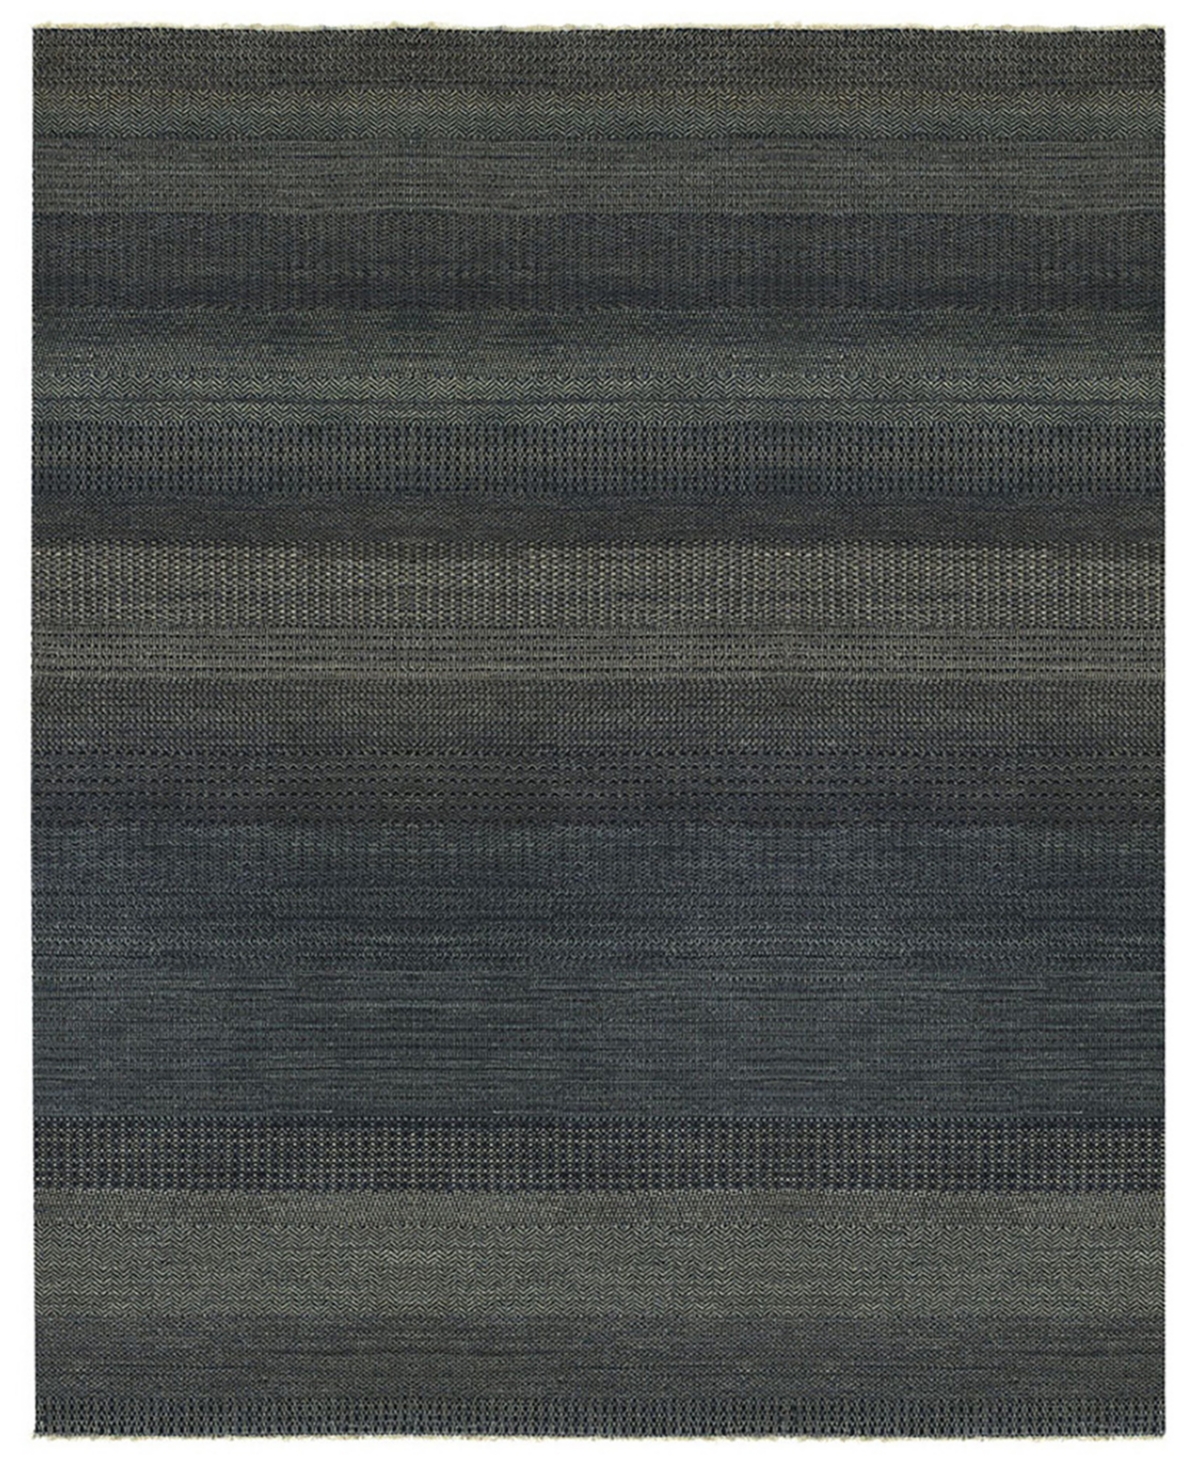 Capel Barrister 475 2' x 3' Area Rug - Midnight